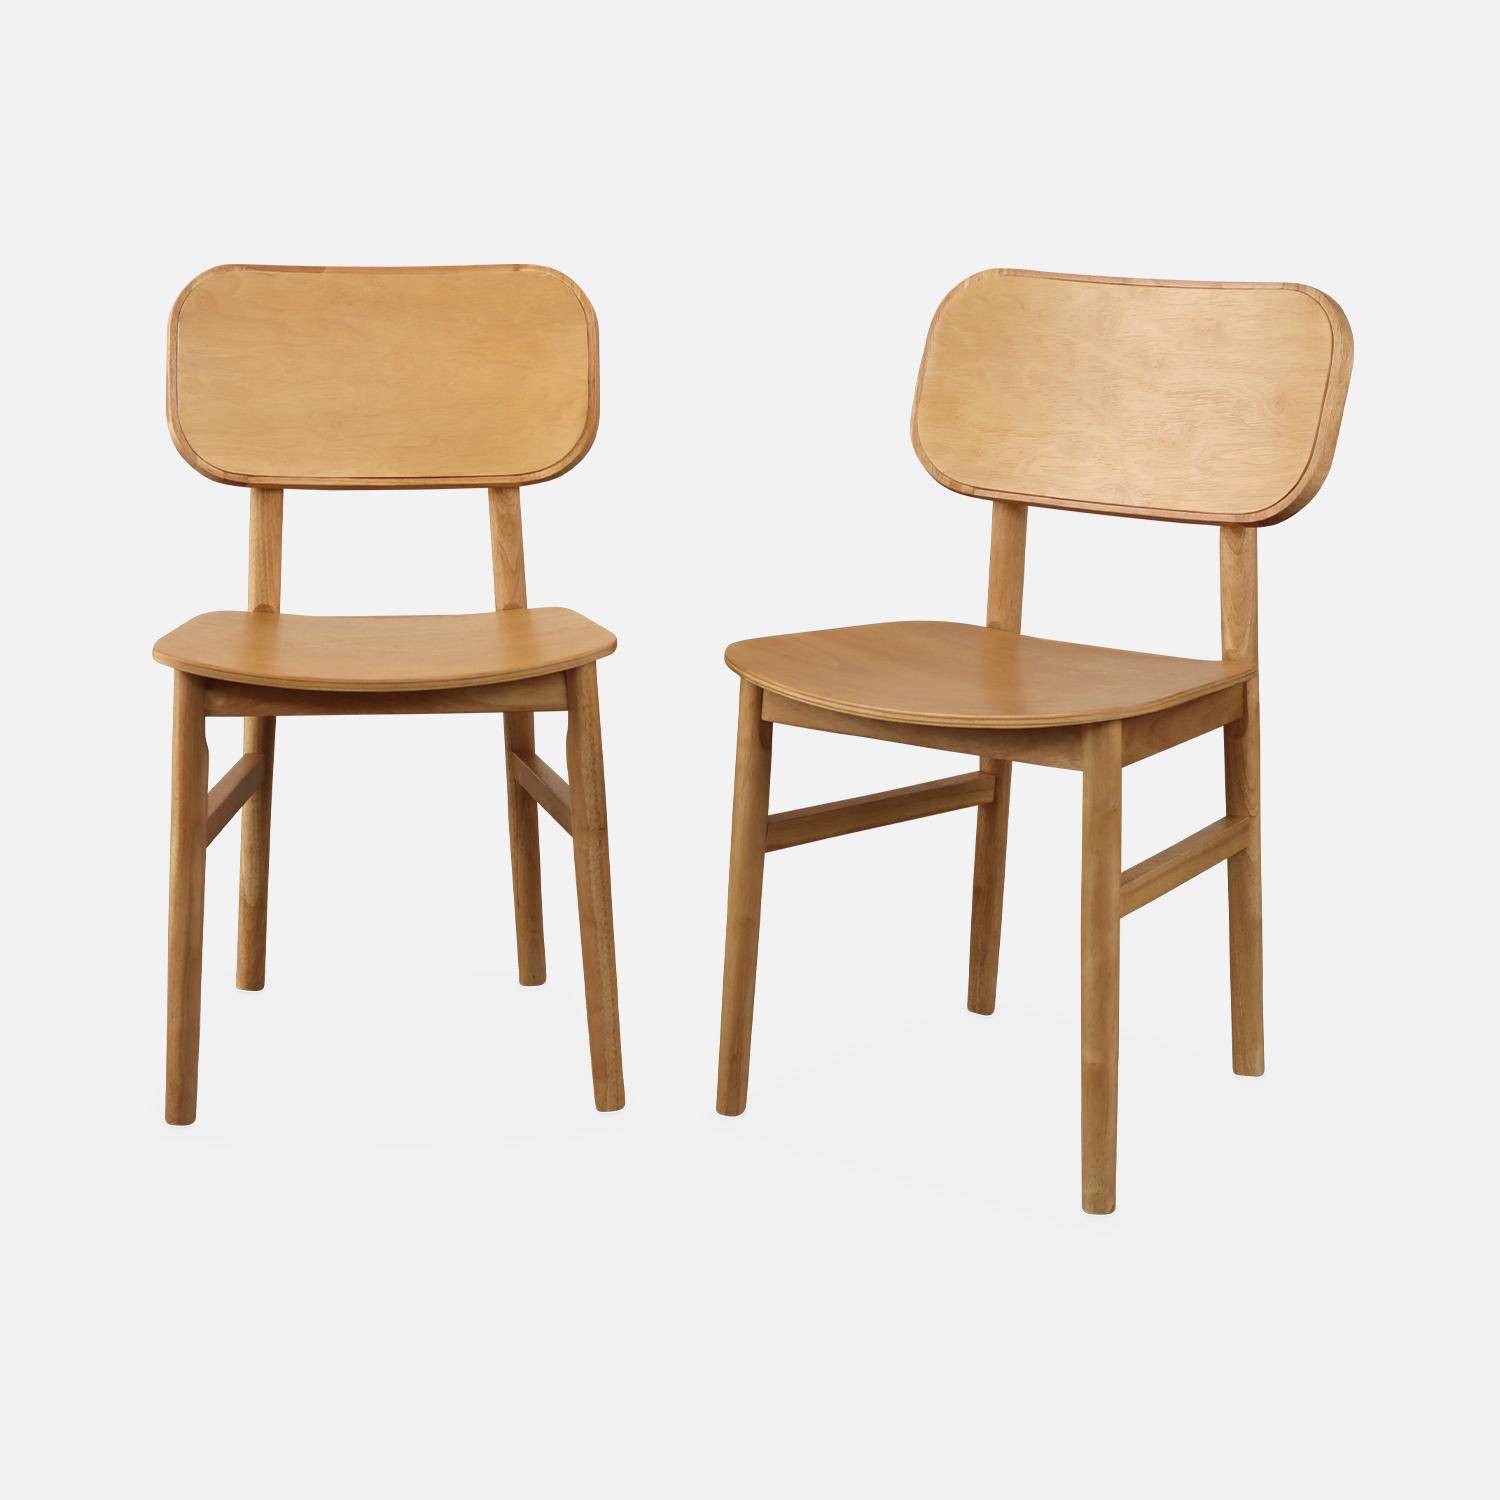 Pair of rubberwood chairs, curved shape, brushed finish Photo5